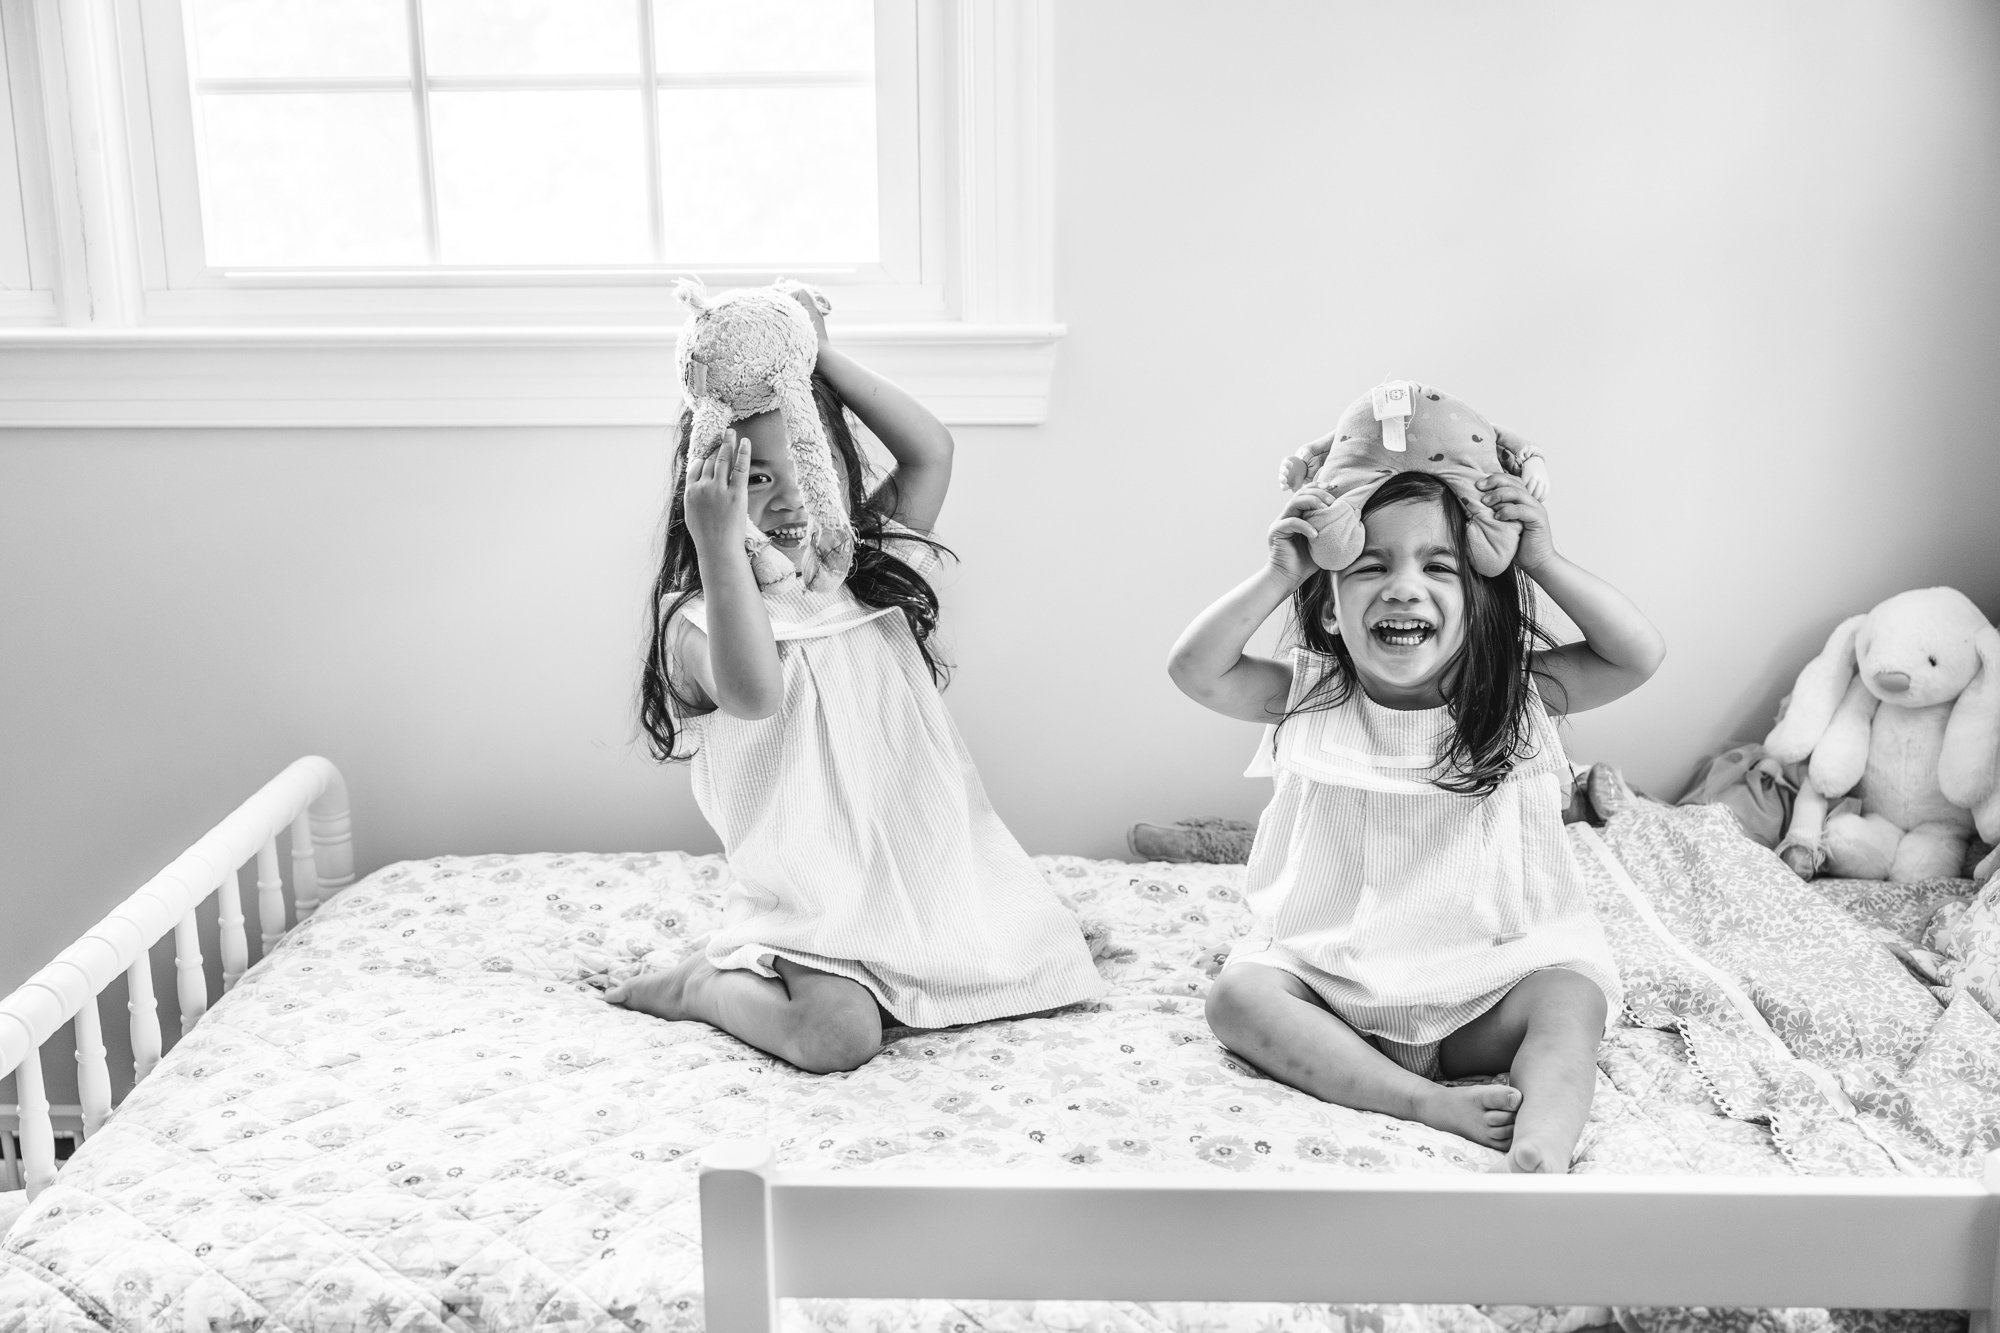  Black and white photo of two young sisters playing and being silly on one of their beds in their bedroom. #newyorkcityphotographer #familyportraits #newbornportraitsession #inhomephotography #familyoffive #familyposeinspo #newjerseyfamilyphotographe